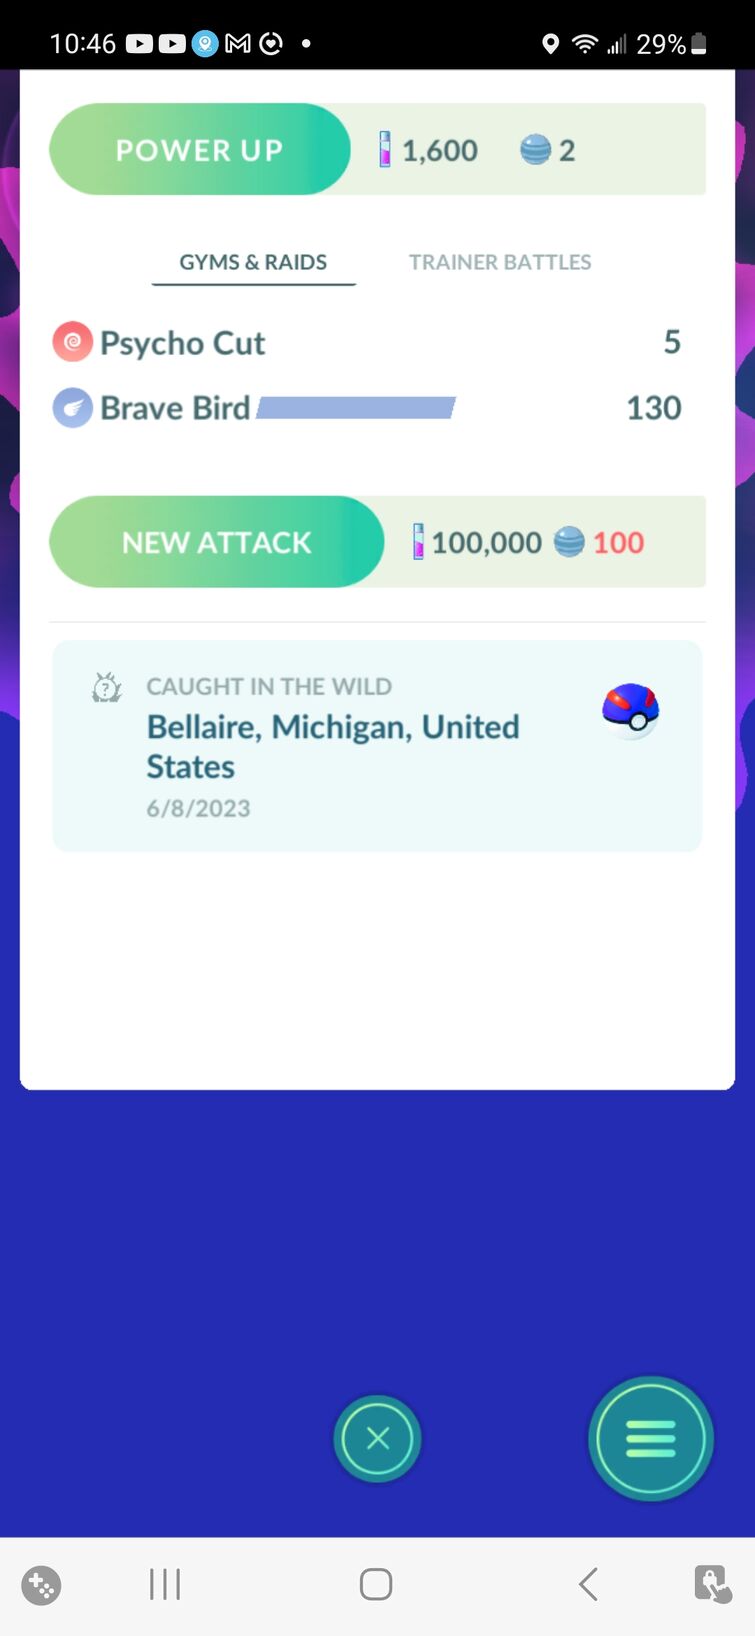 😵 Using MASTER BALL for galarian articuno but wait.. 